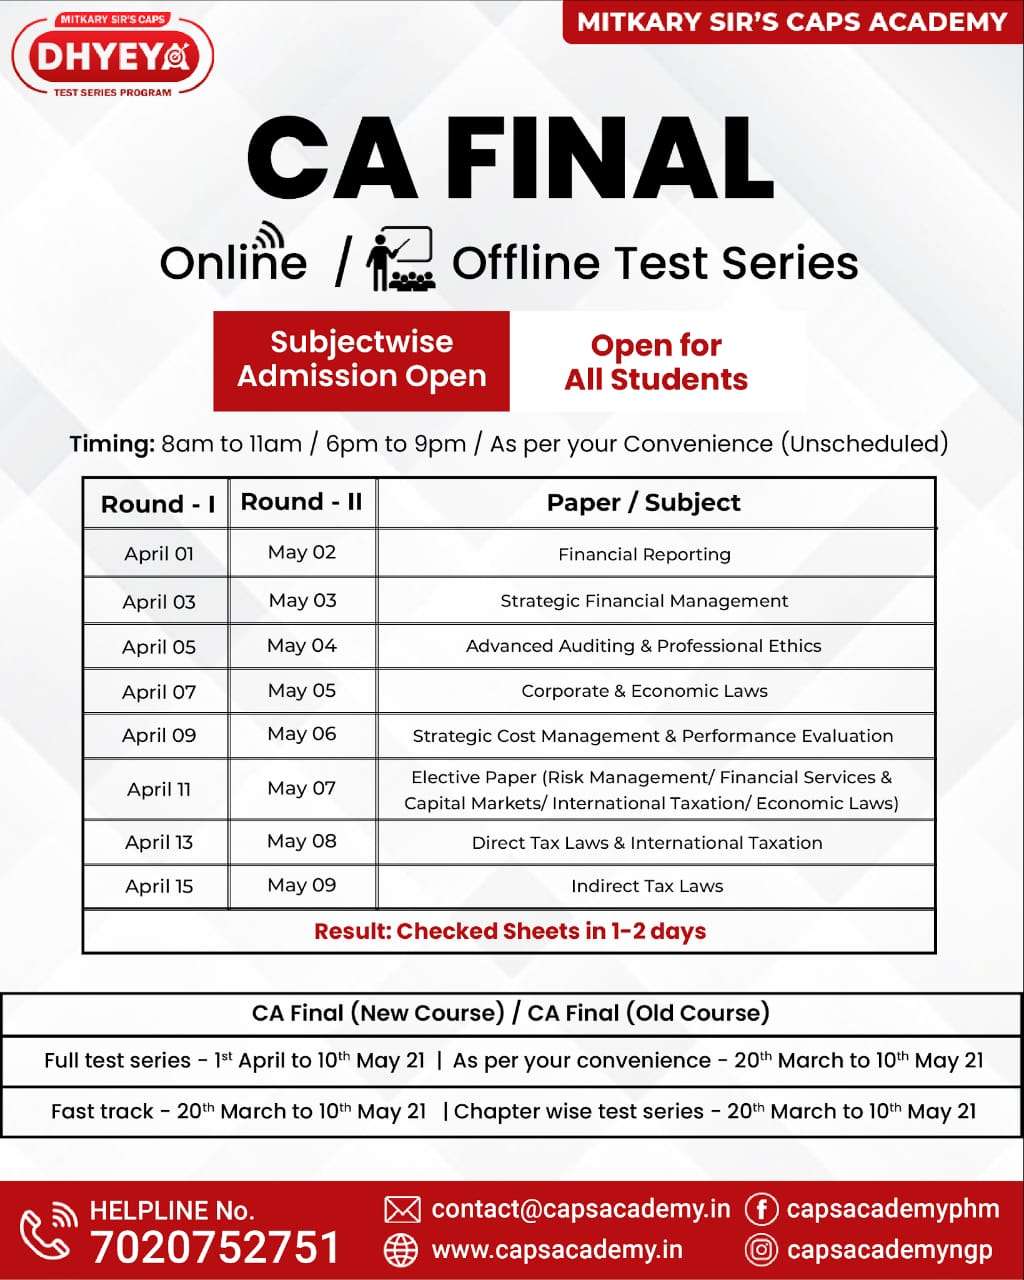 CA Final Test Series Time Table